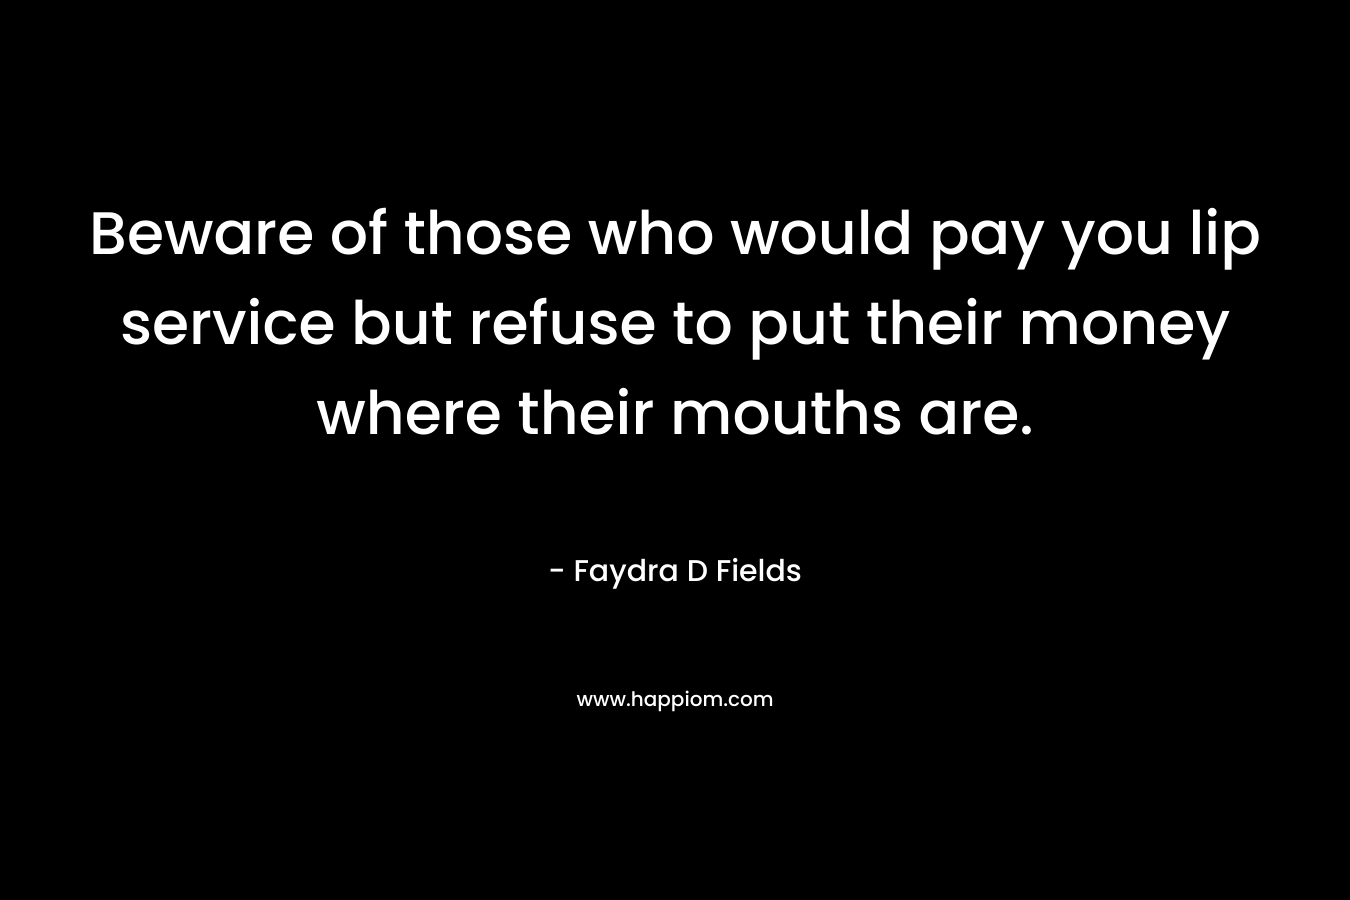 Beware of those who would pay you lip service but refuse to put their money where their mouths are. – Faydra D Fields